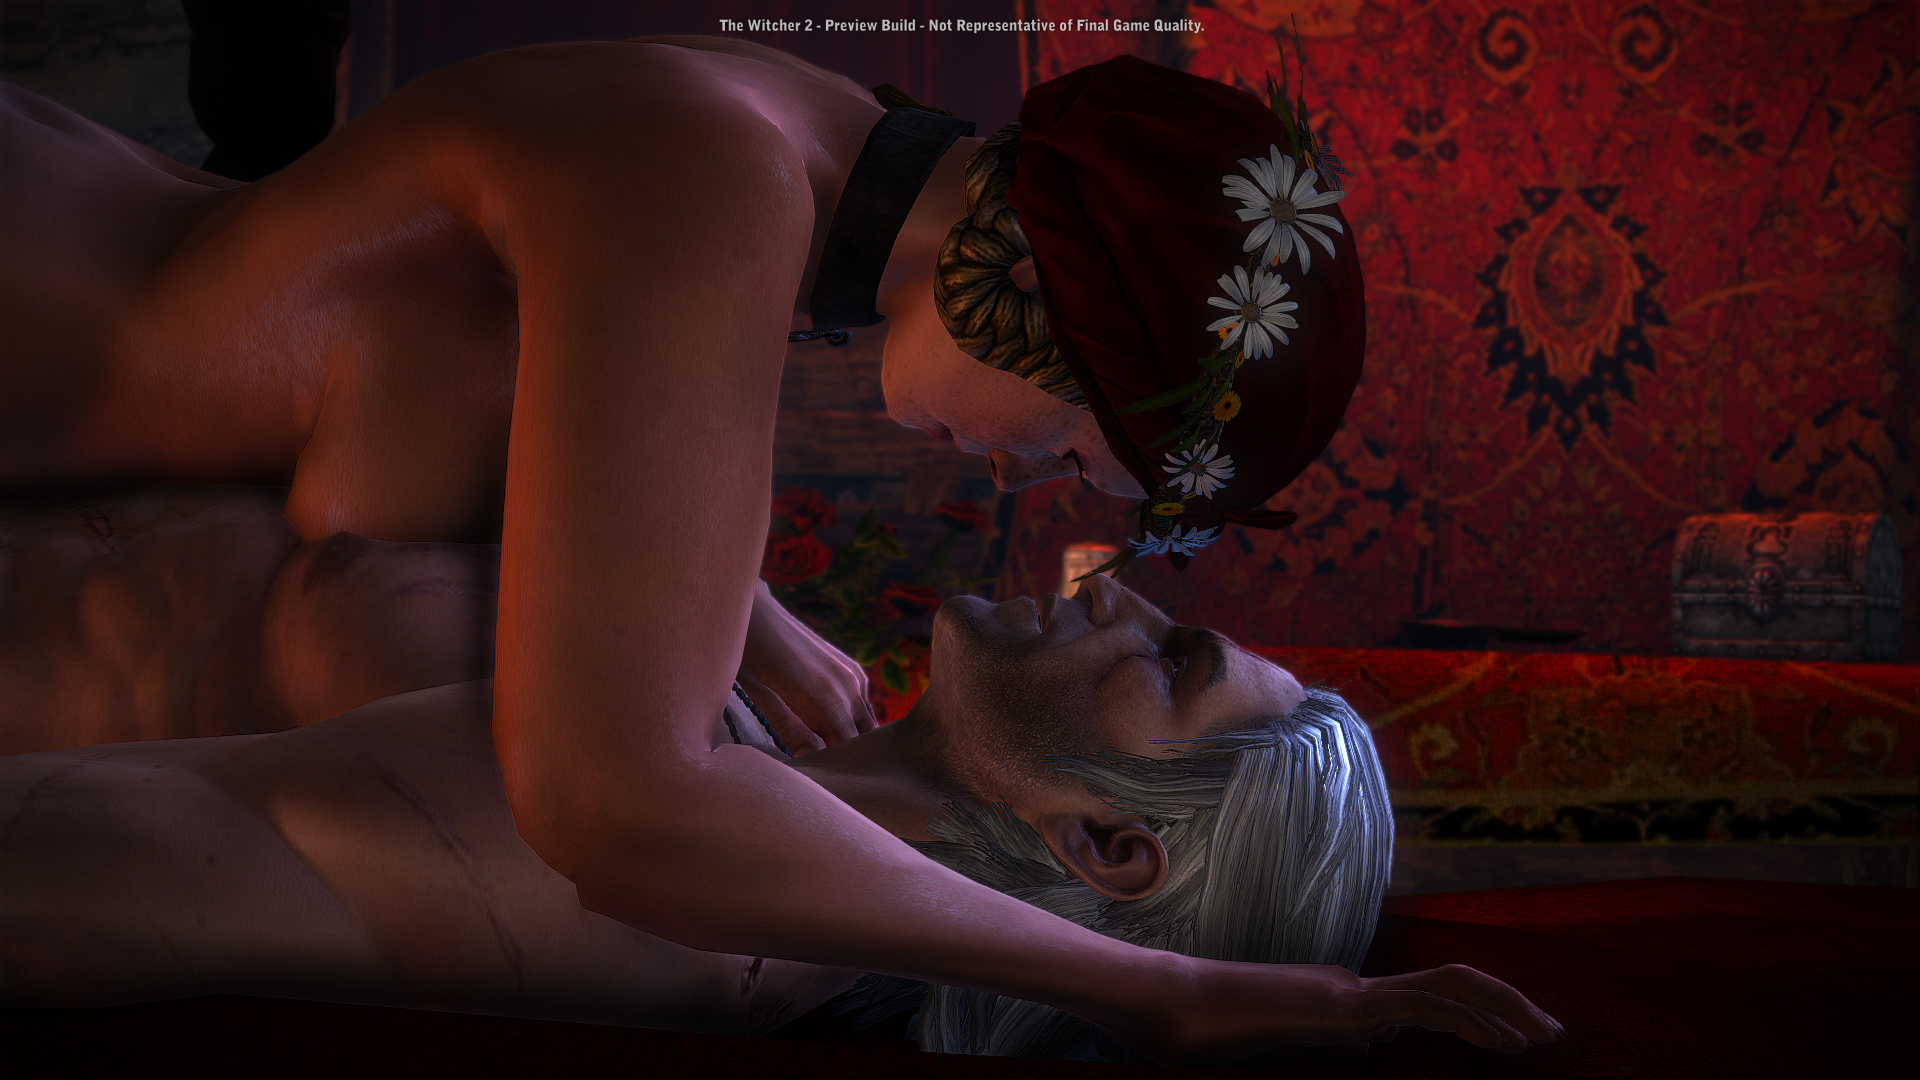 The Witcher 2: Assassins of Kings Image Gallery.